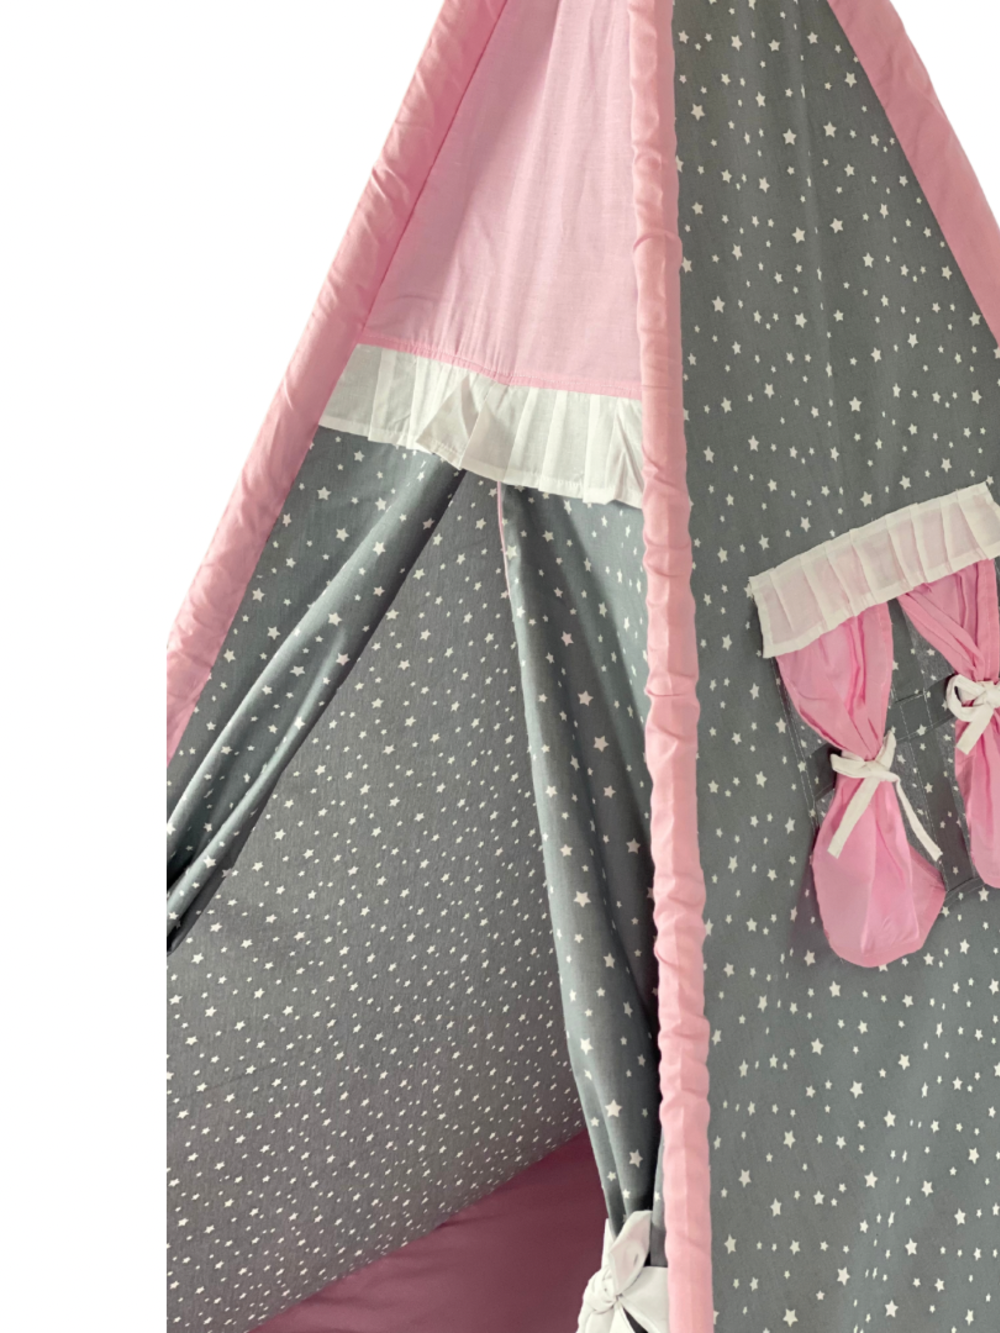 Children's Tent - teepee tent Pink and Stars